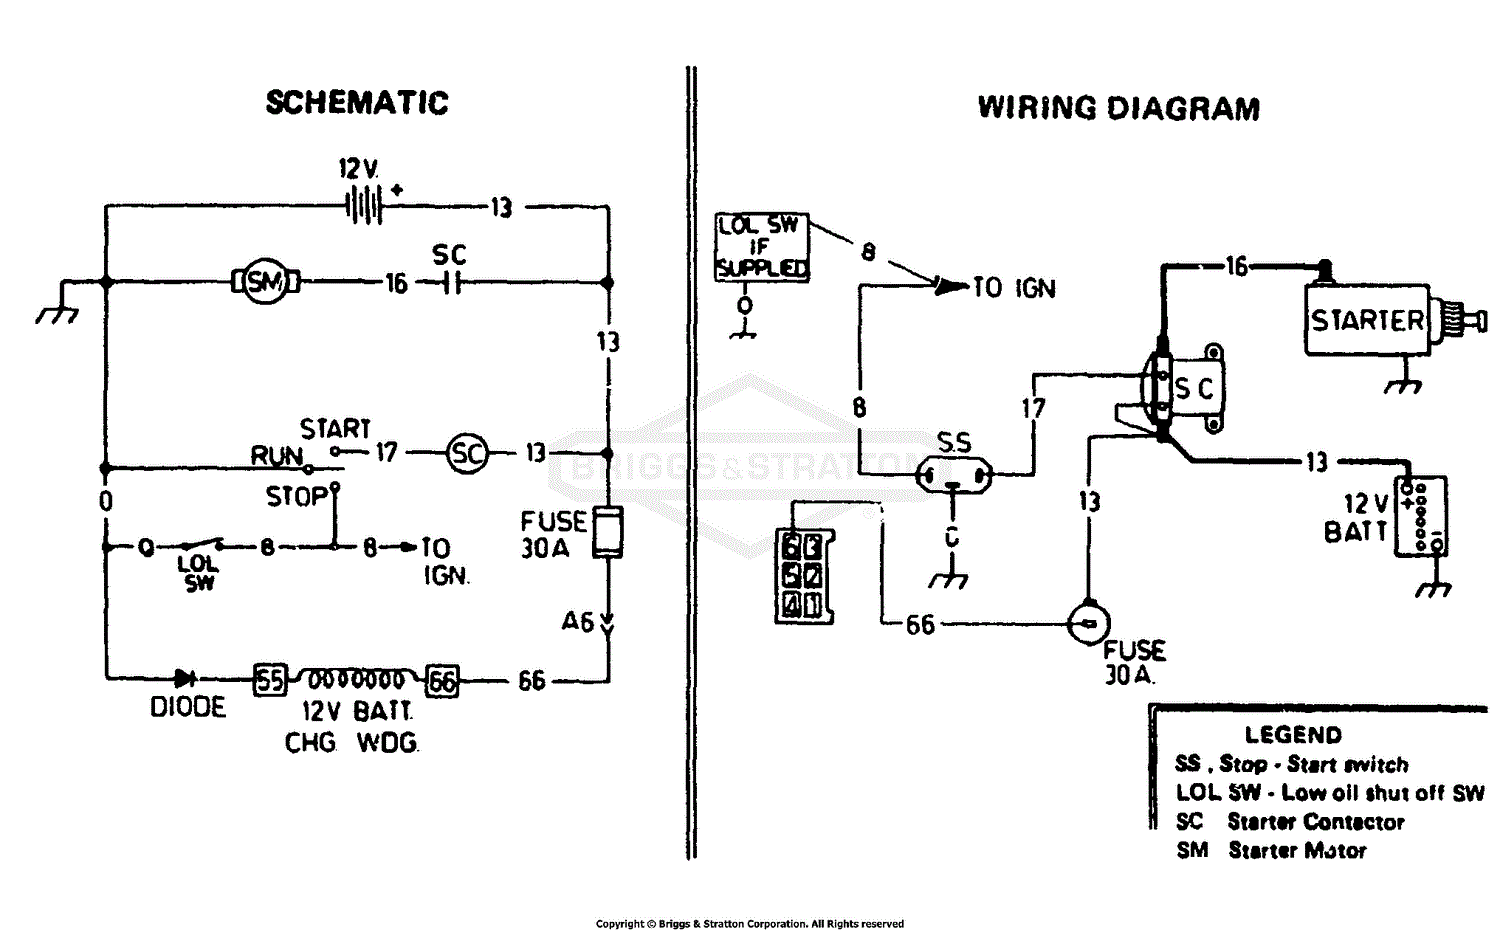 Electric Start Schematic And Wiring Diagram